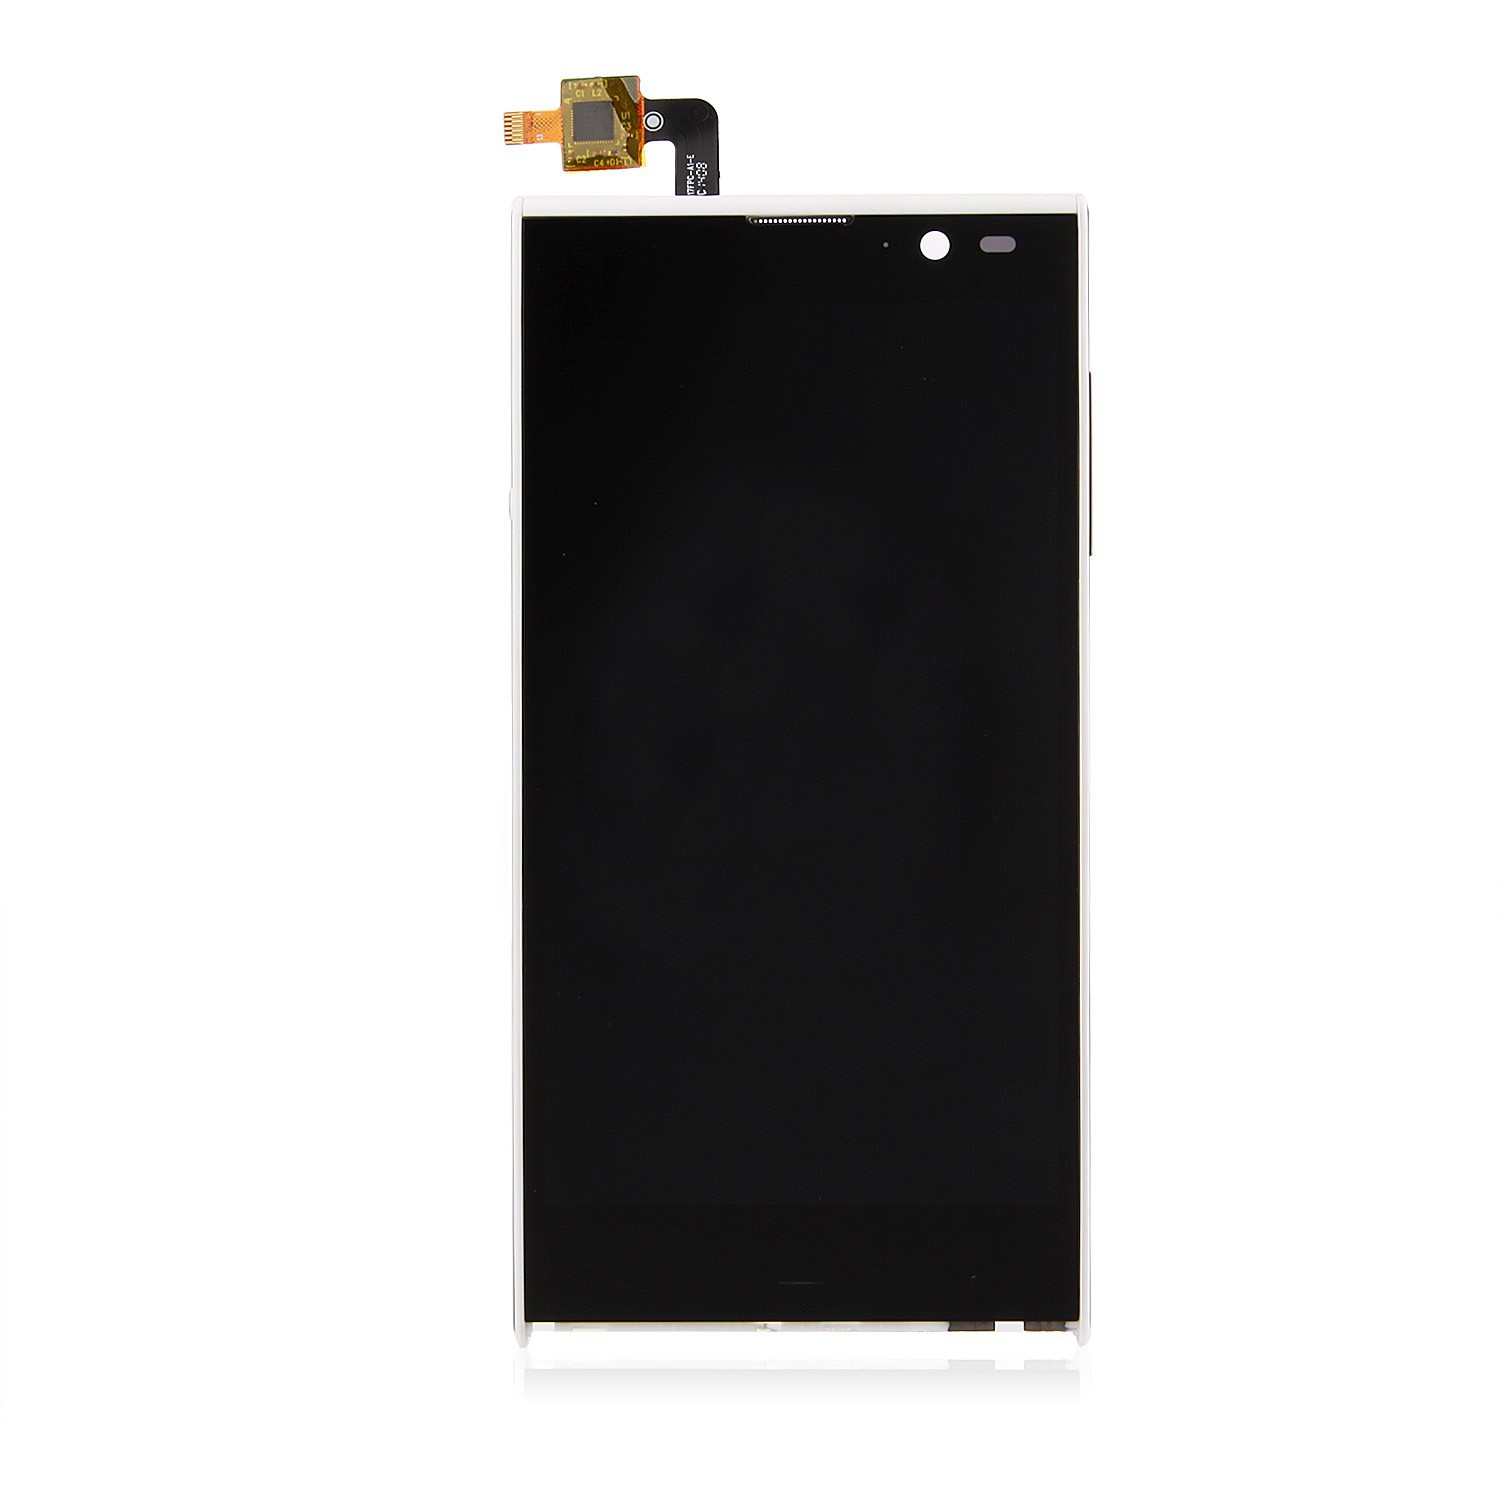 Coolpad Mobile Display Repair and Replacement In Chennai